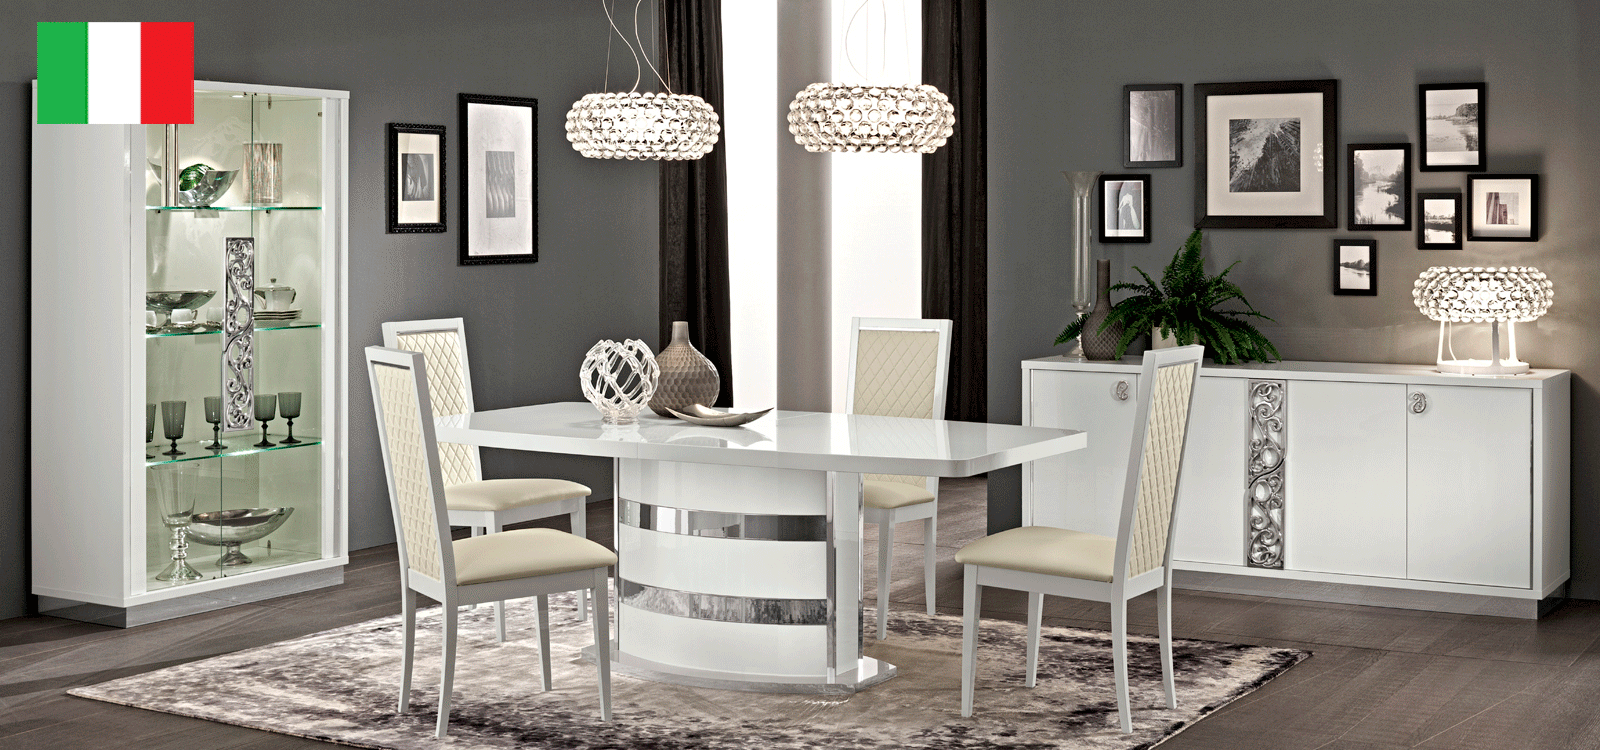 Brands Unico Tables and Chairs, Italy Roma Dining White, Italy